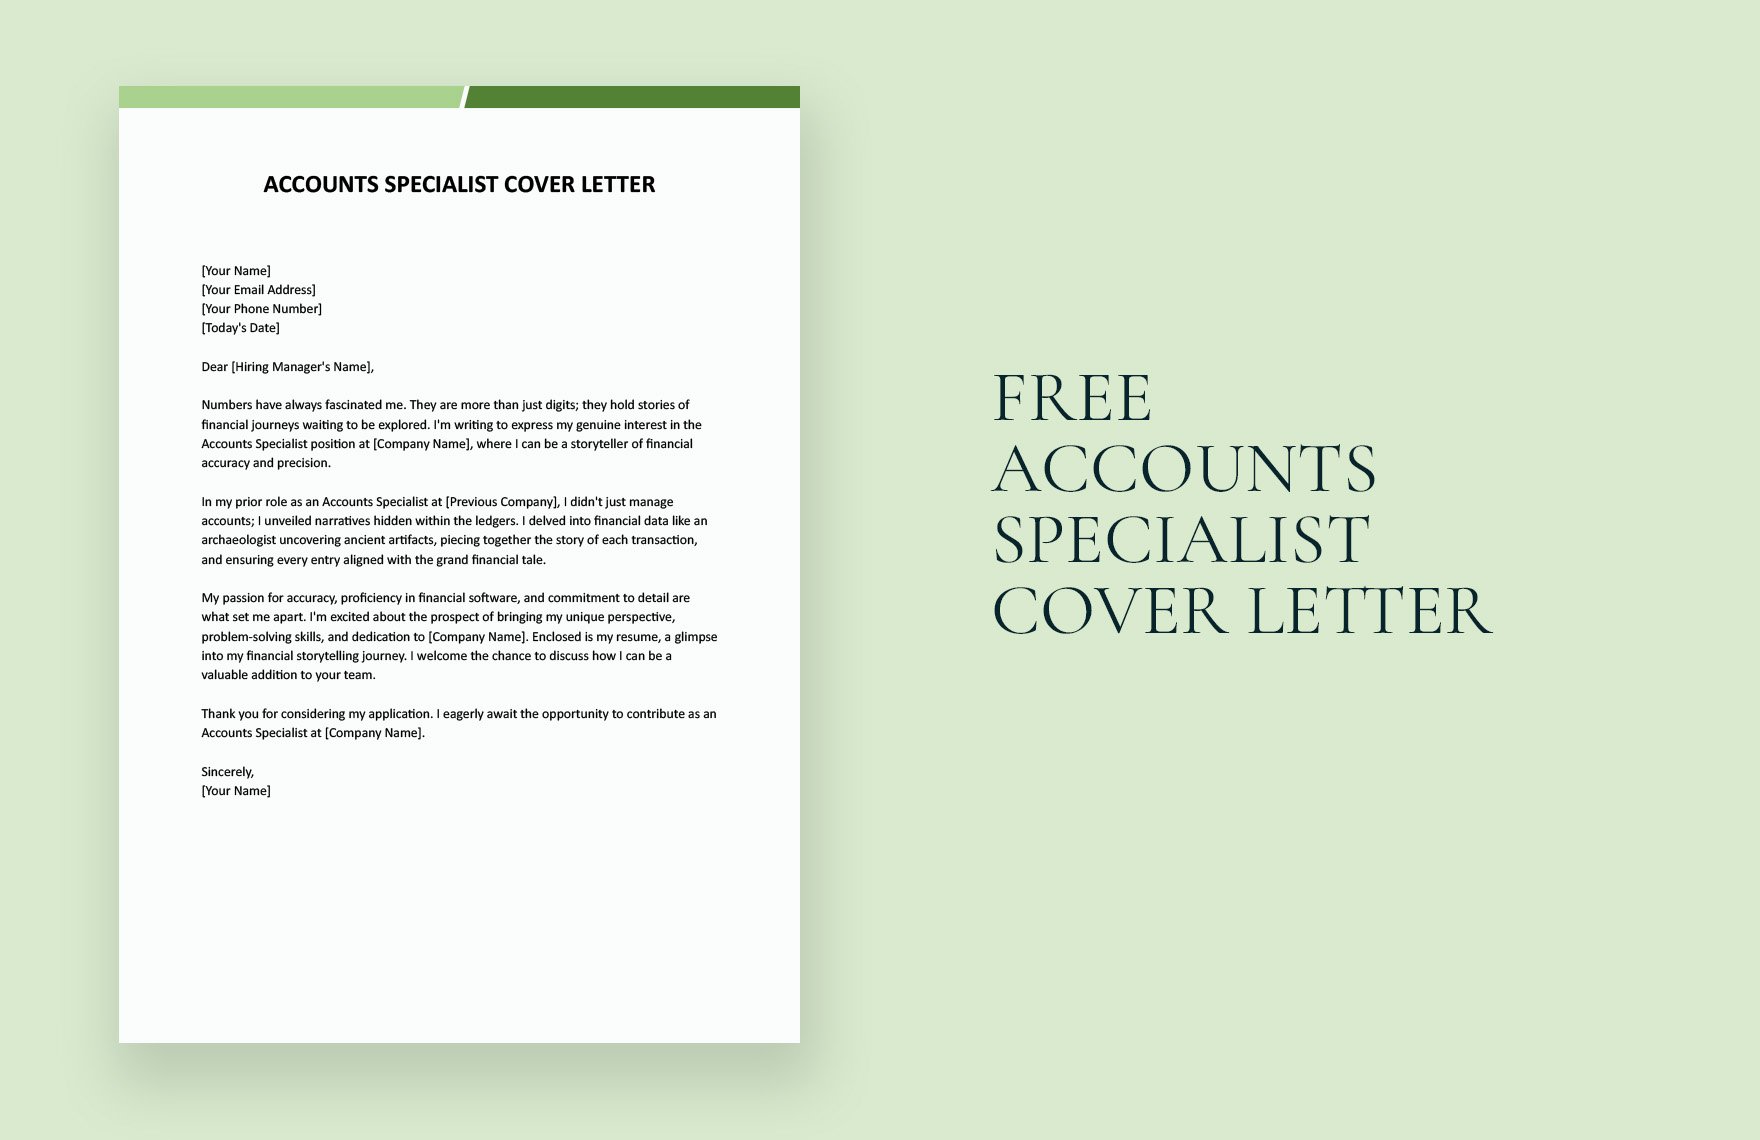 Accounts Specialist Cover Letter in Word, Google Docs